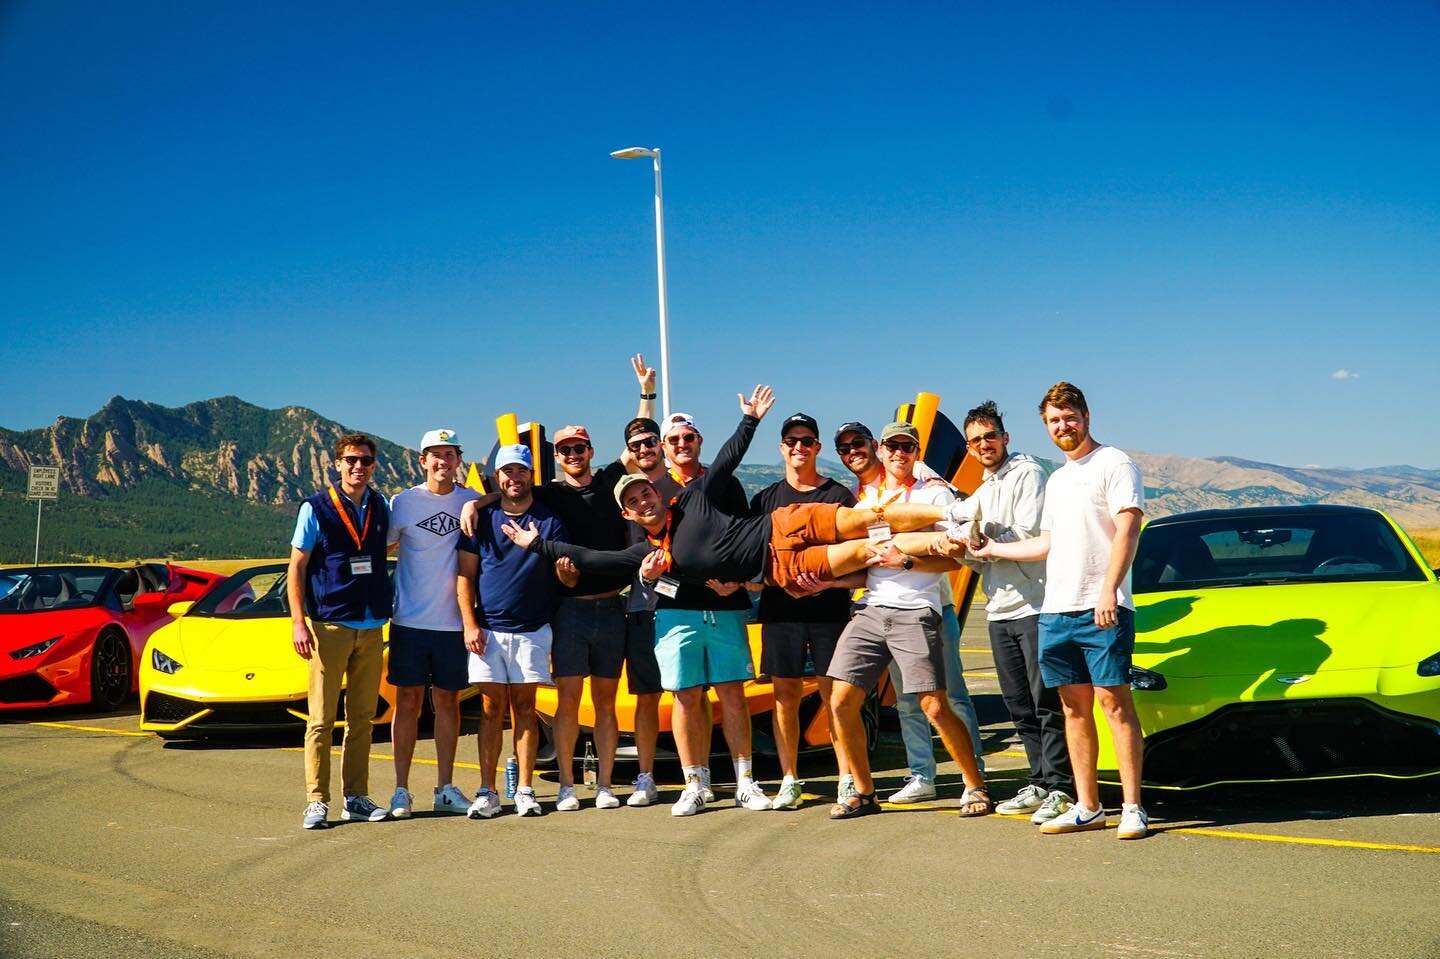 We had back to back 105 mile Tours sold out 周六. Needless to say this 本科 party had an amazing experience 🙌🏻 

#bachelor #bachelorparty #colorado #boulder #supercar #supercartour